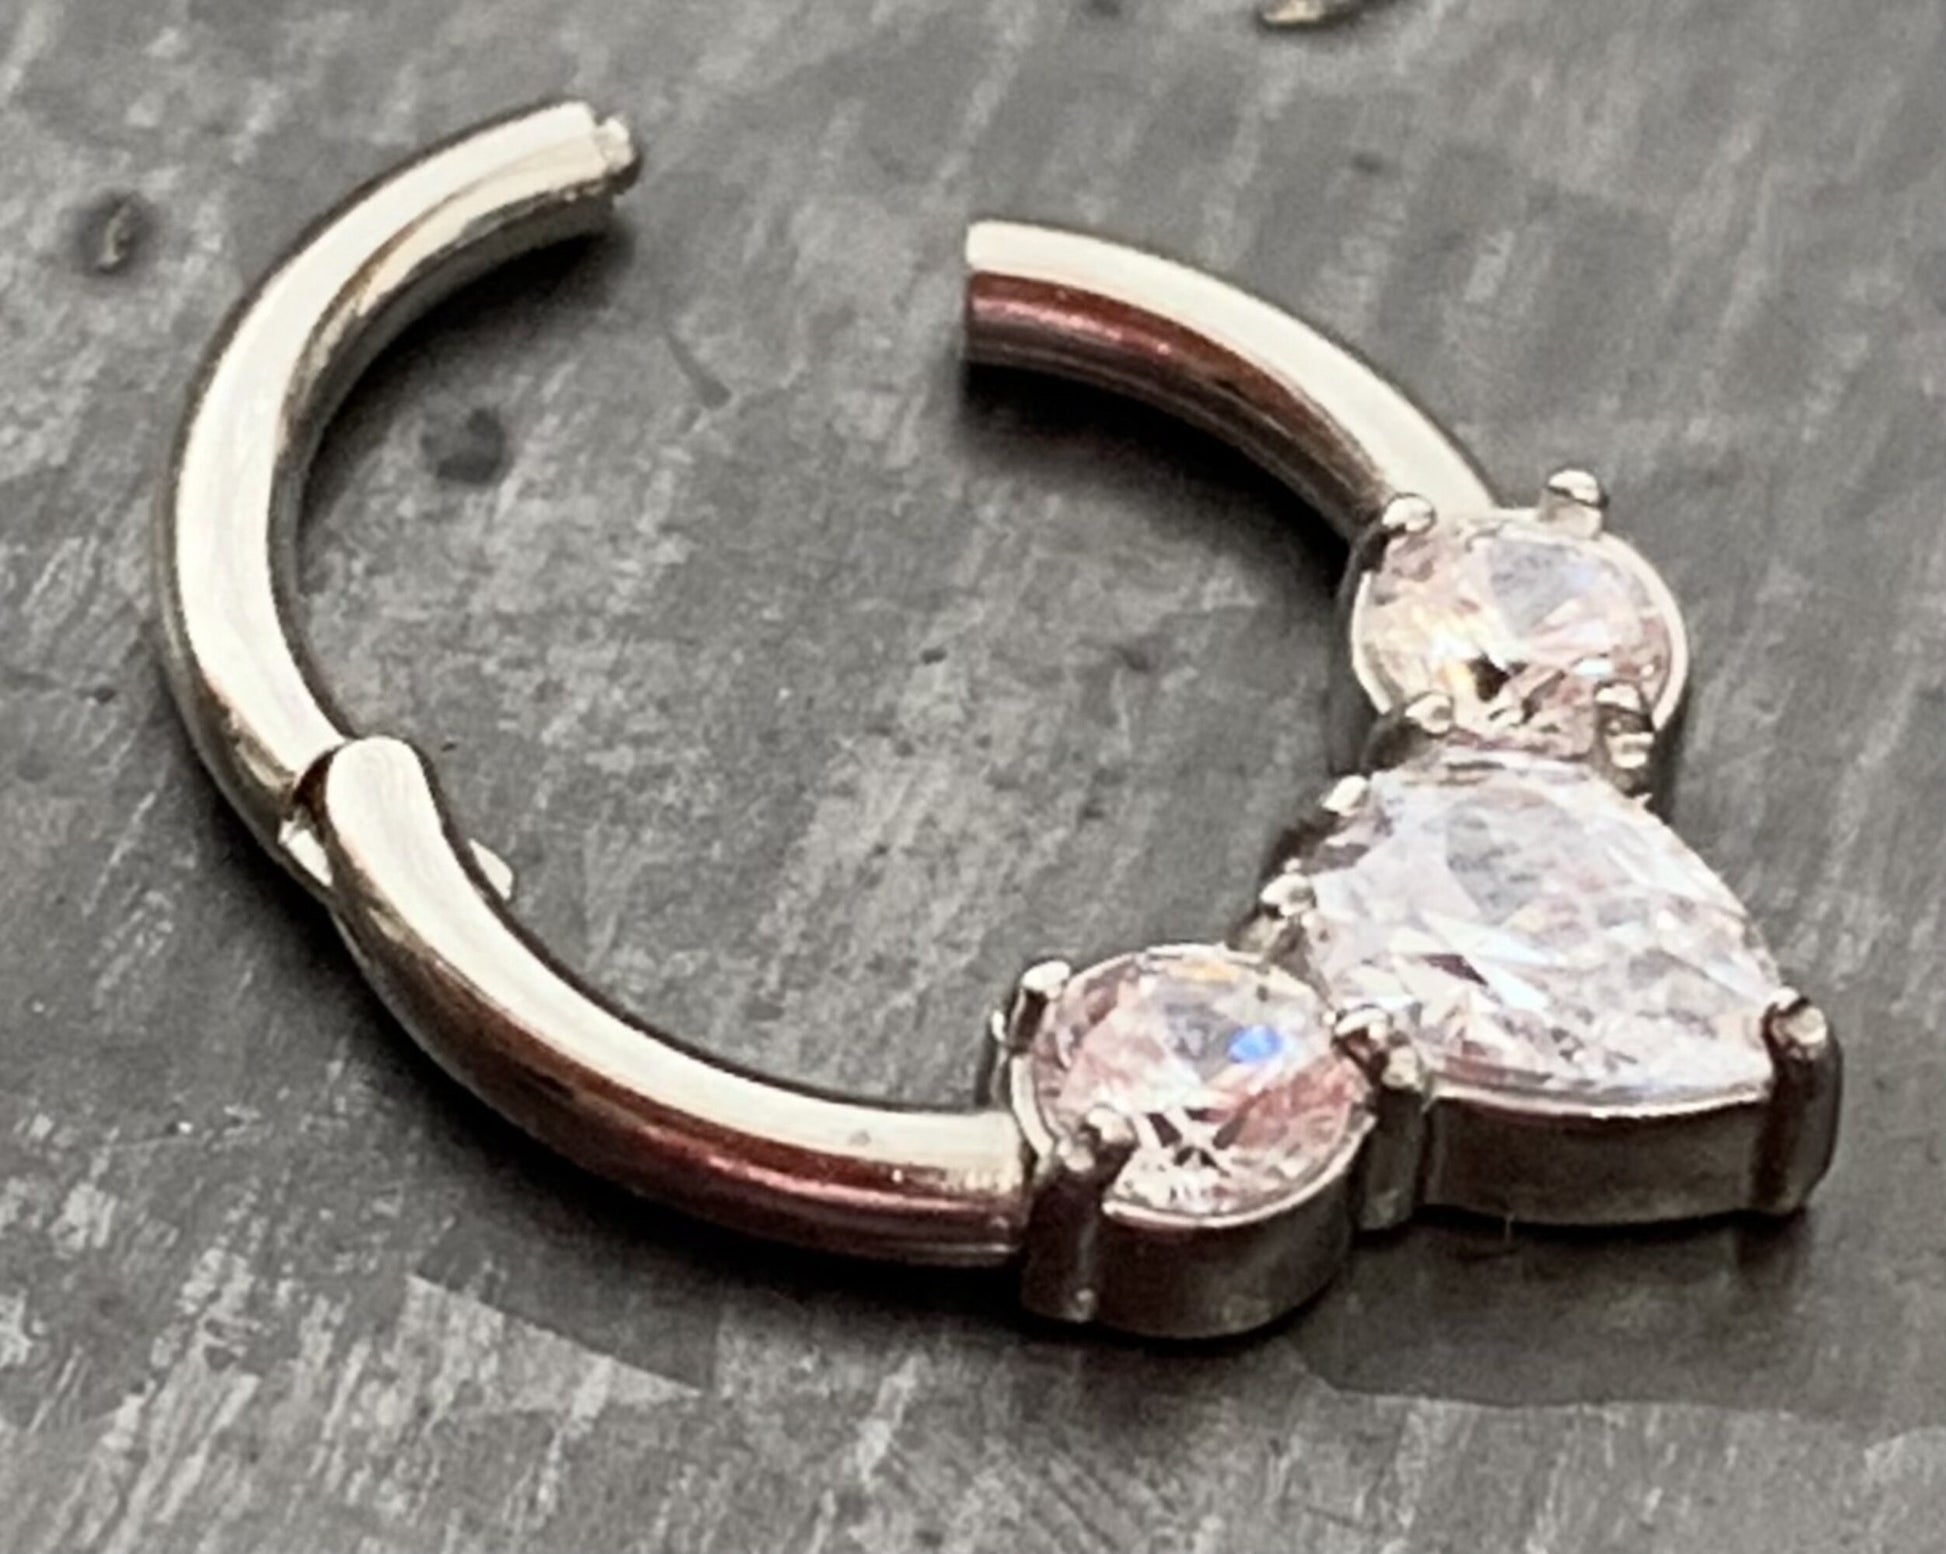 1 Piece Stunning Pear CZ Gem Surgical Steel Hinged Segment Ring - 16g - 8mm Internal Diameter - Gold, Rose Gold and Silver!!